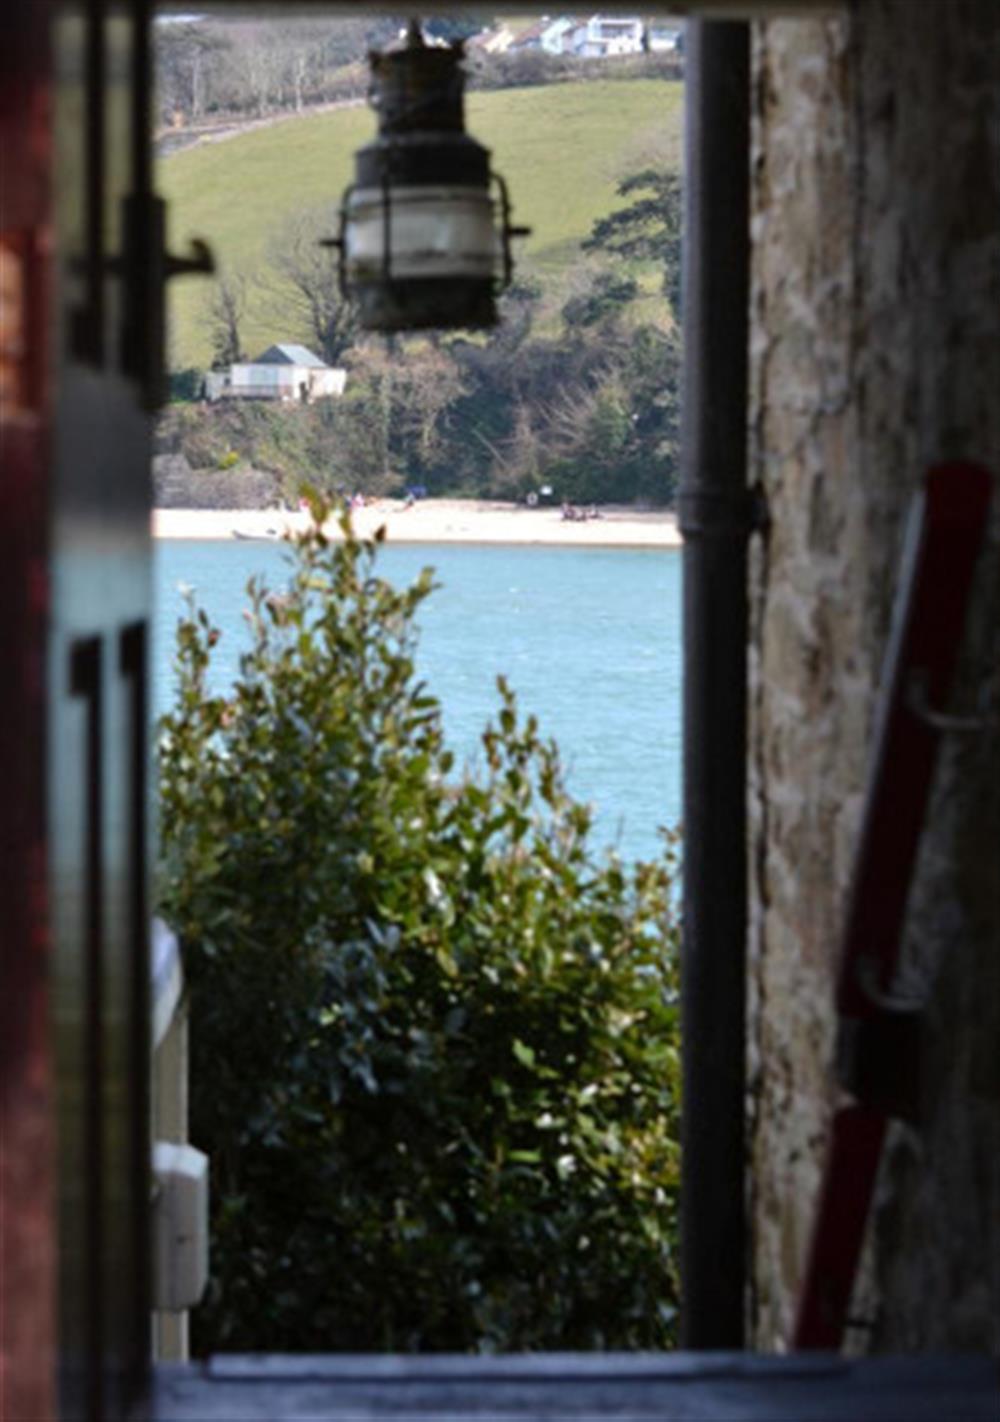 Views towards East Portlemouth from the Salcombe Ferry Inn. at Little Haven in East Portlemouth